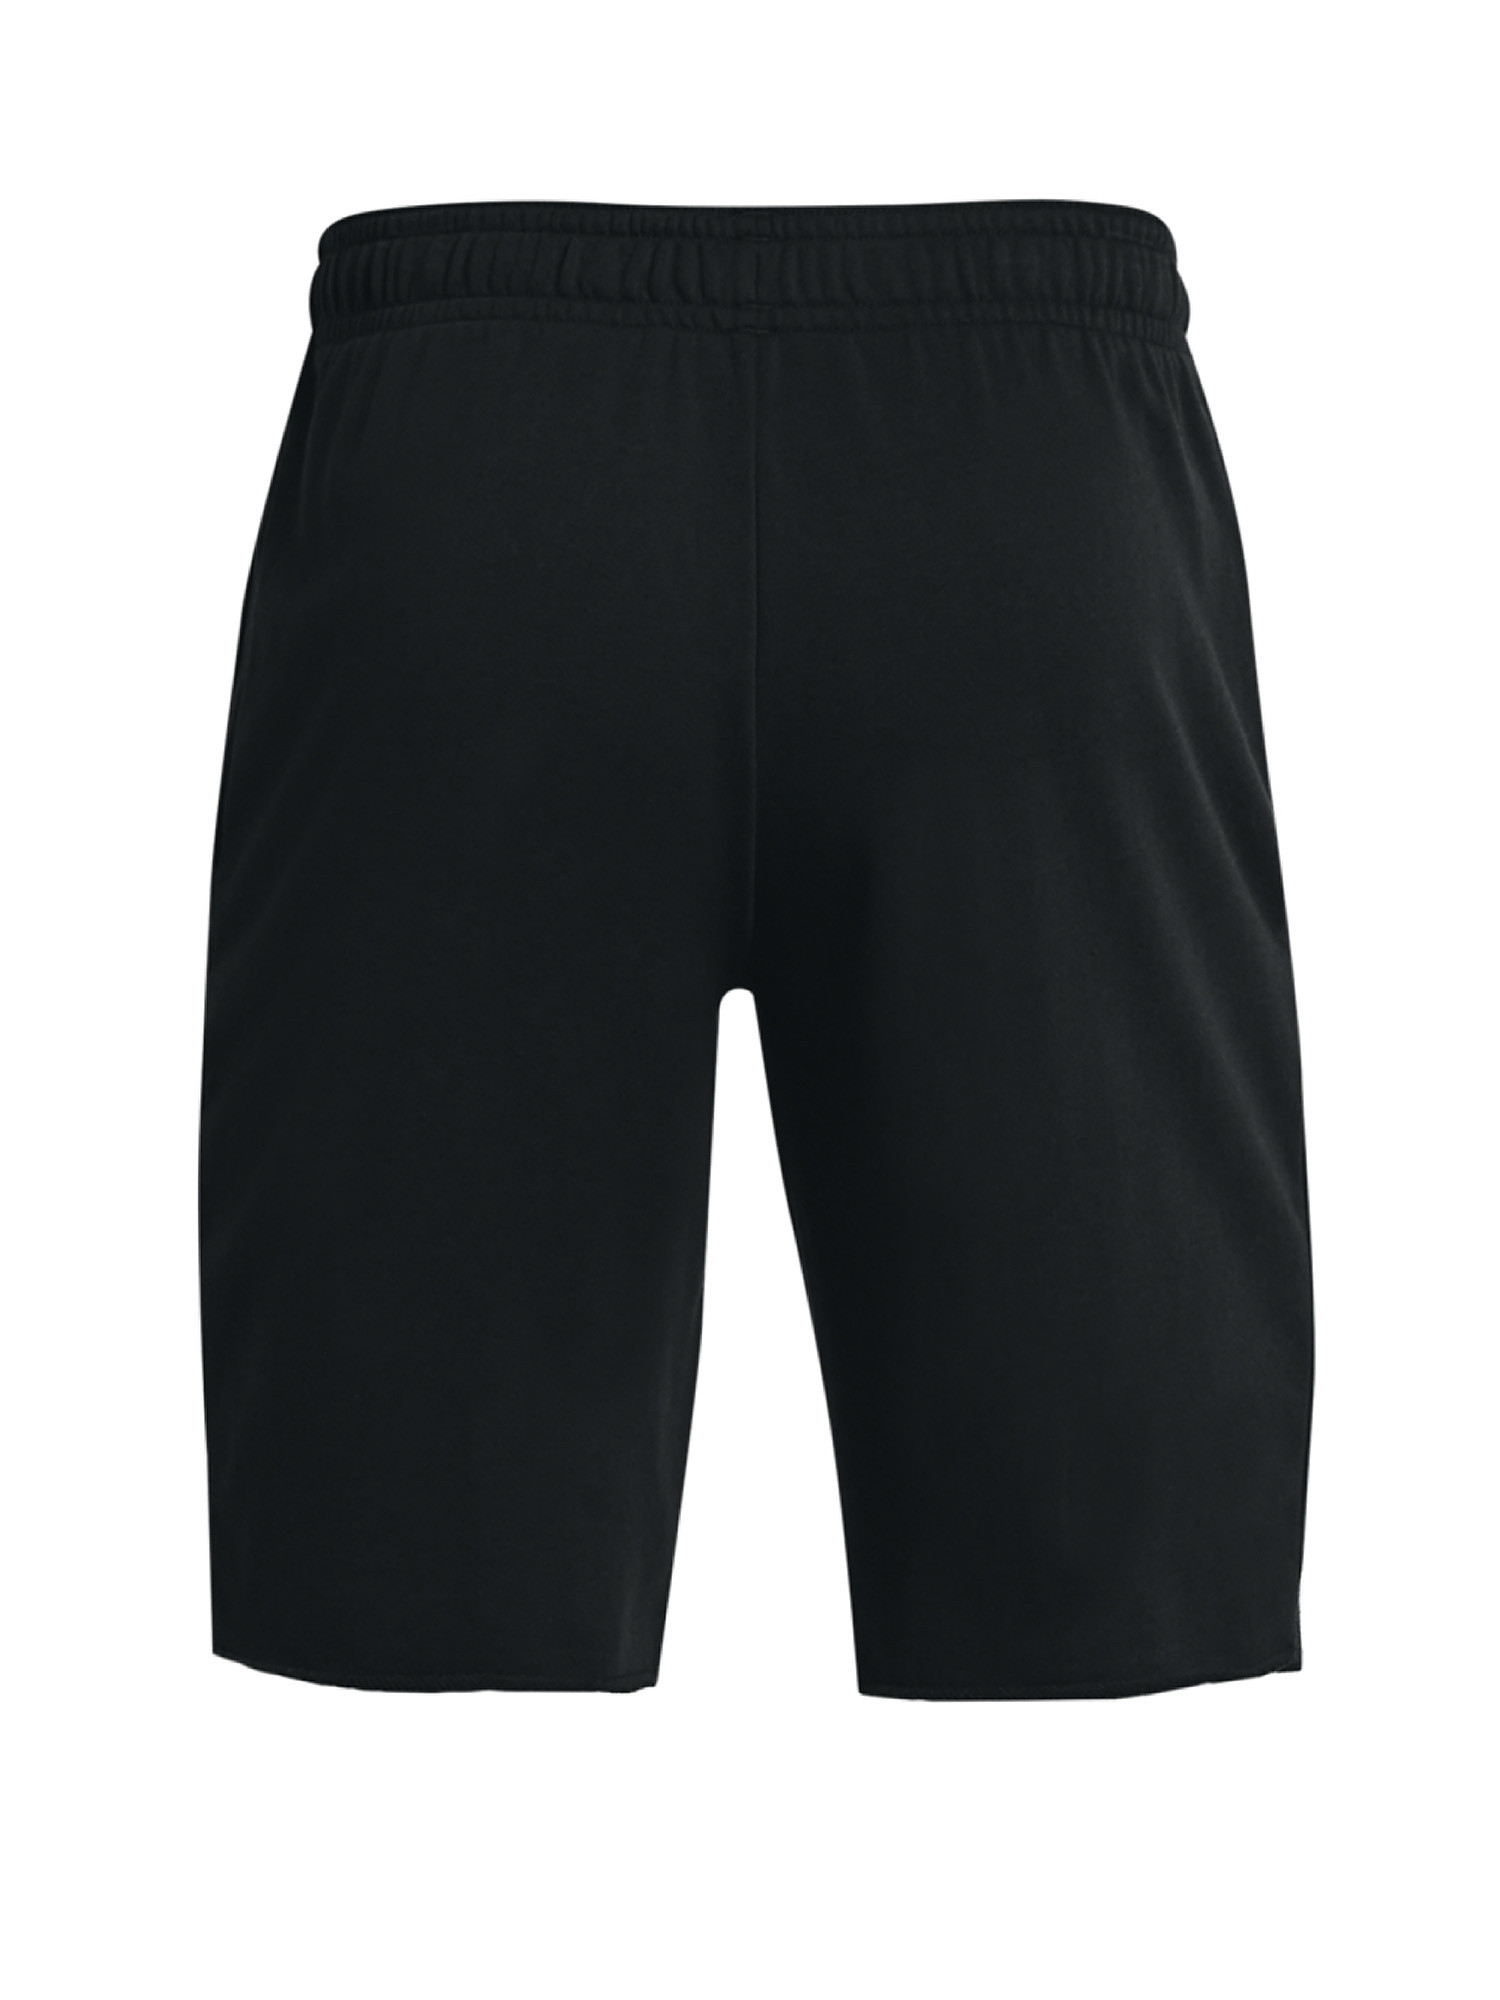 UA Rival Terry Shorts, Black, large image number 1